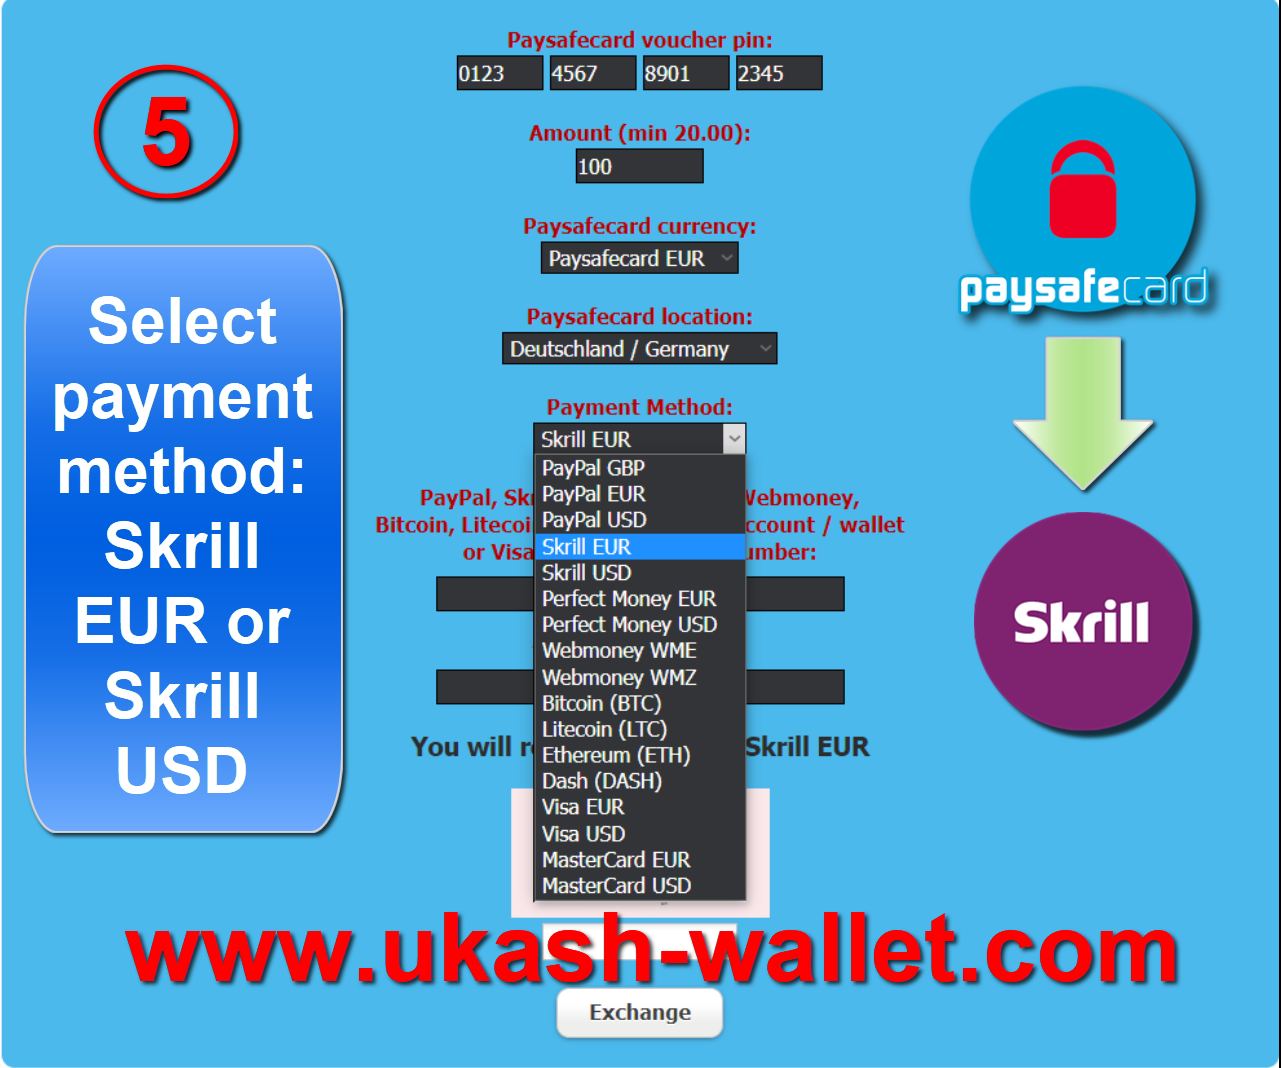 Paysafecard to Skrill instantly - Step five.